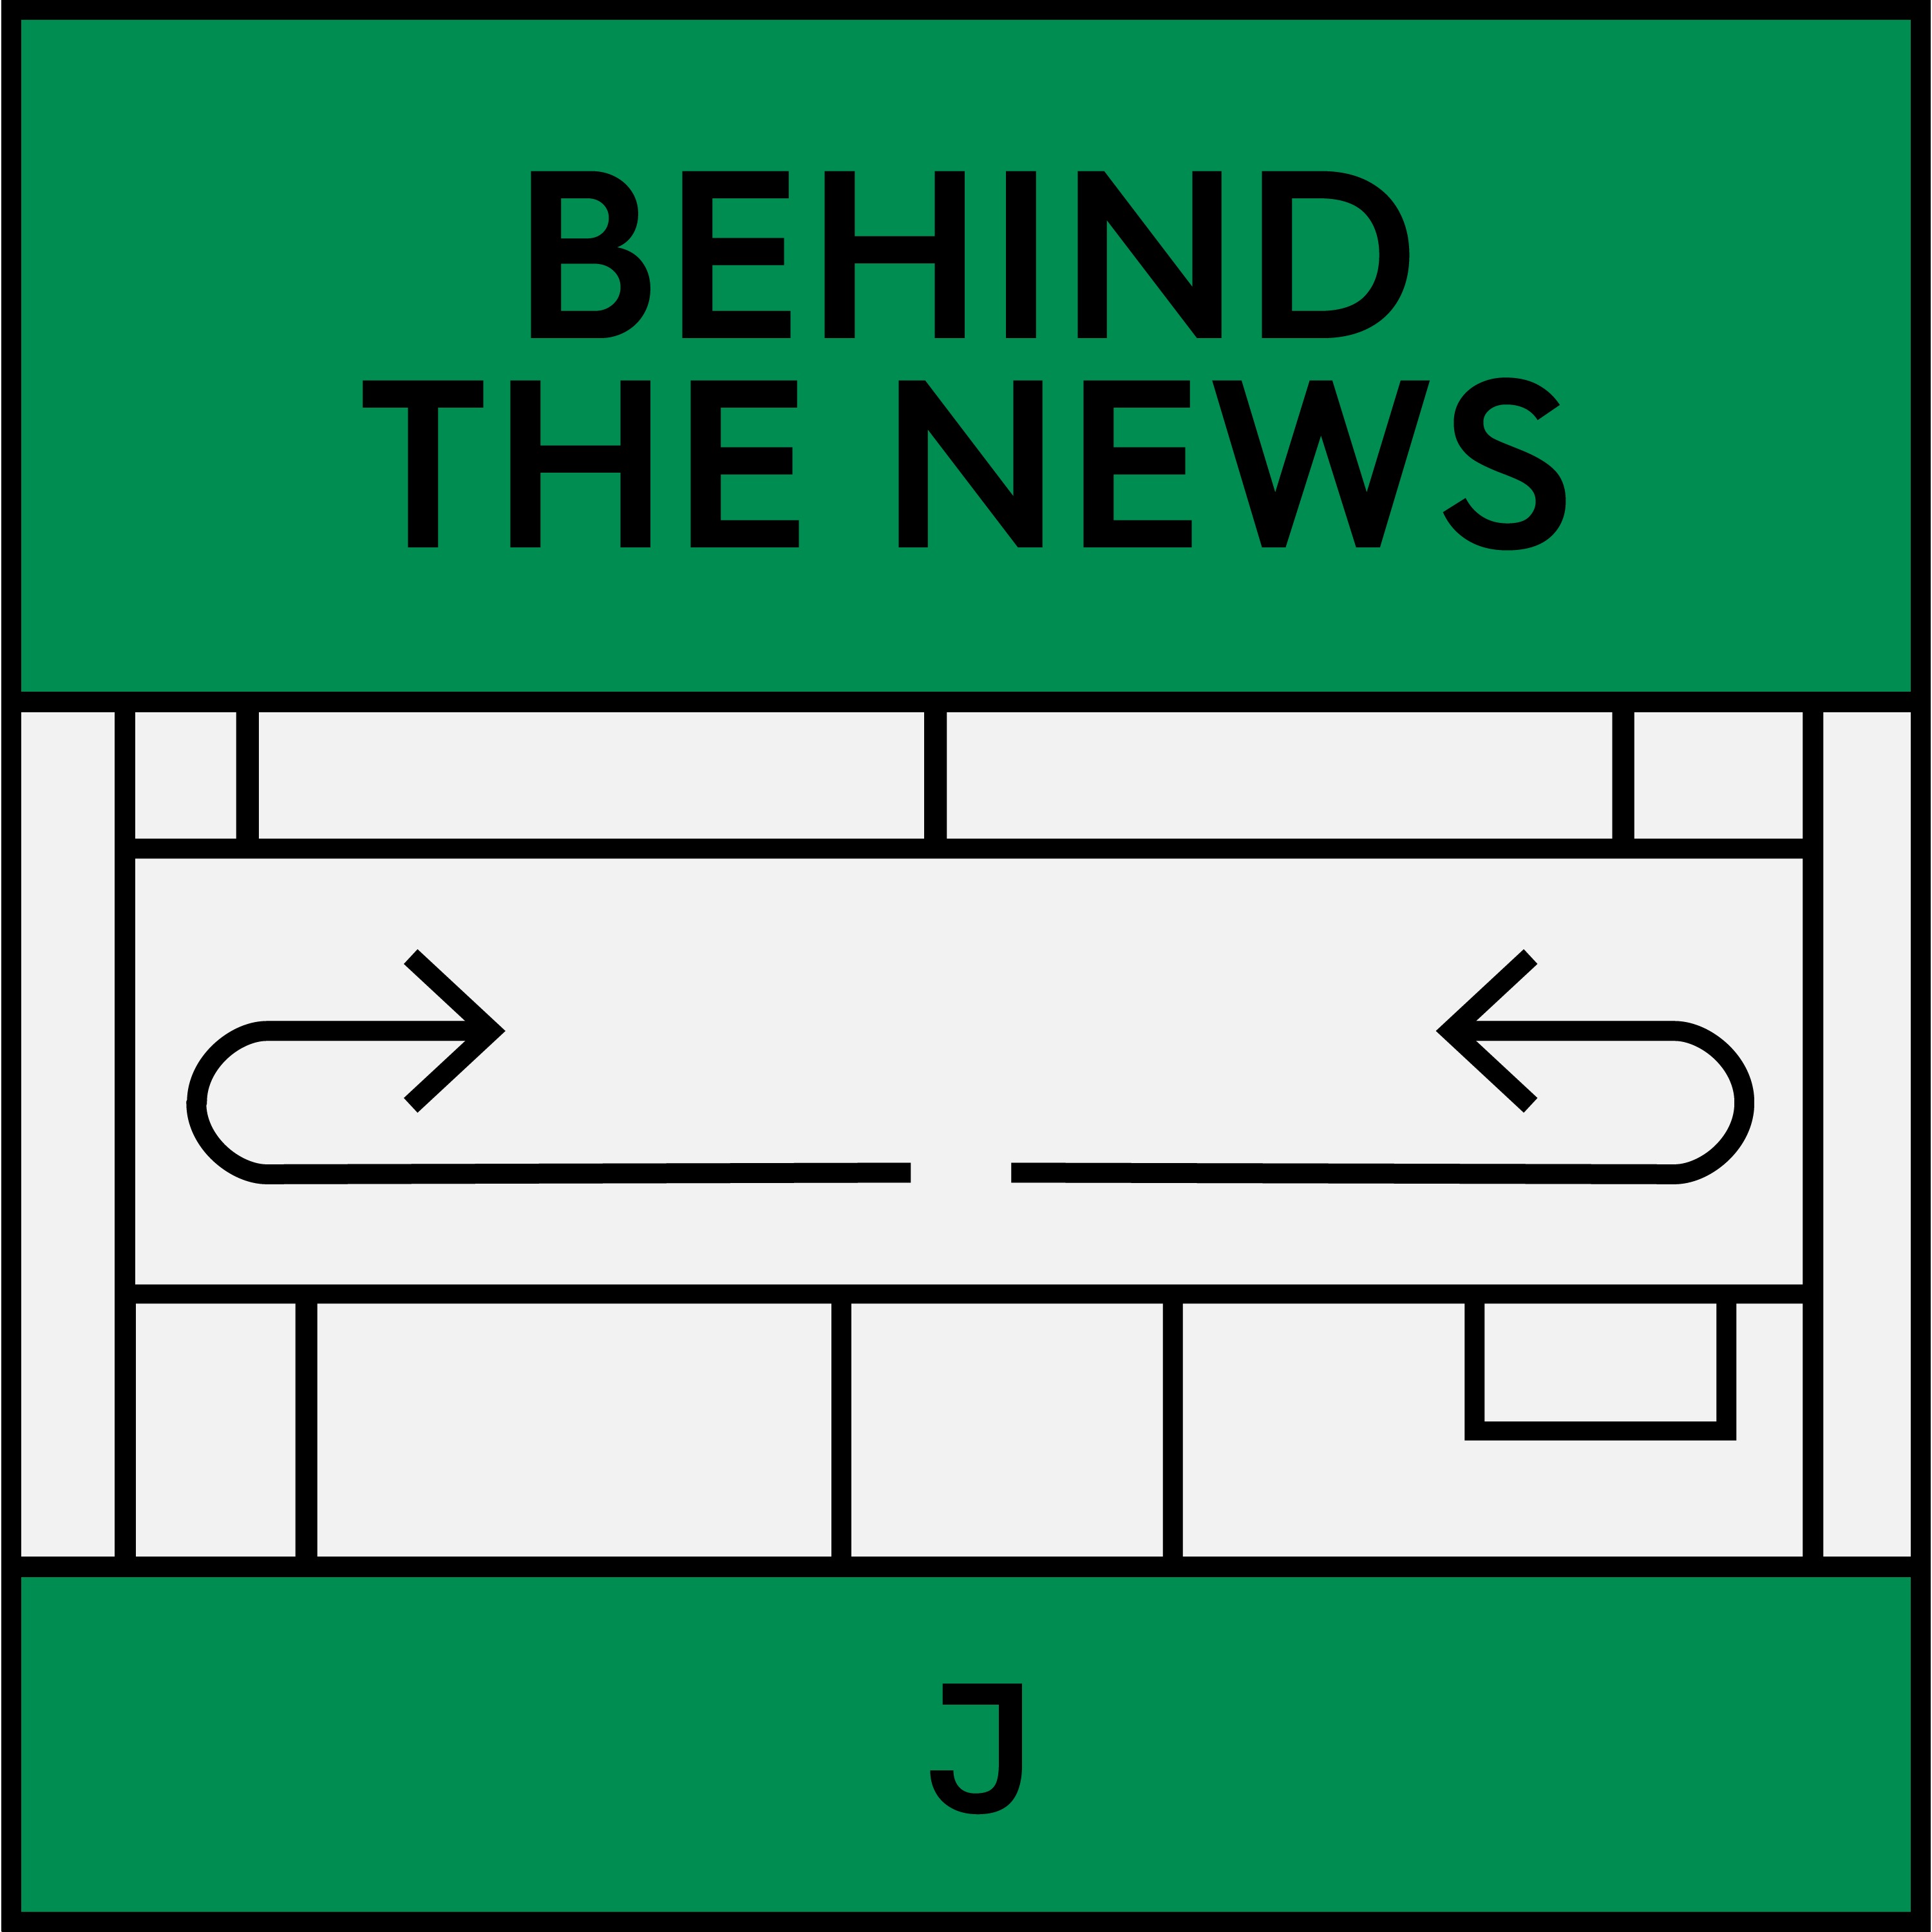 Behind the News: A Look Rightward